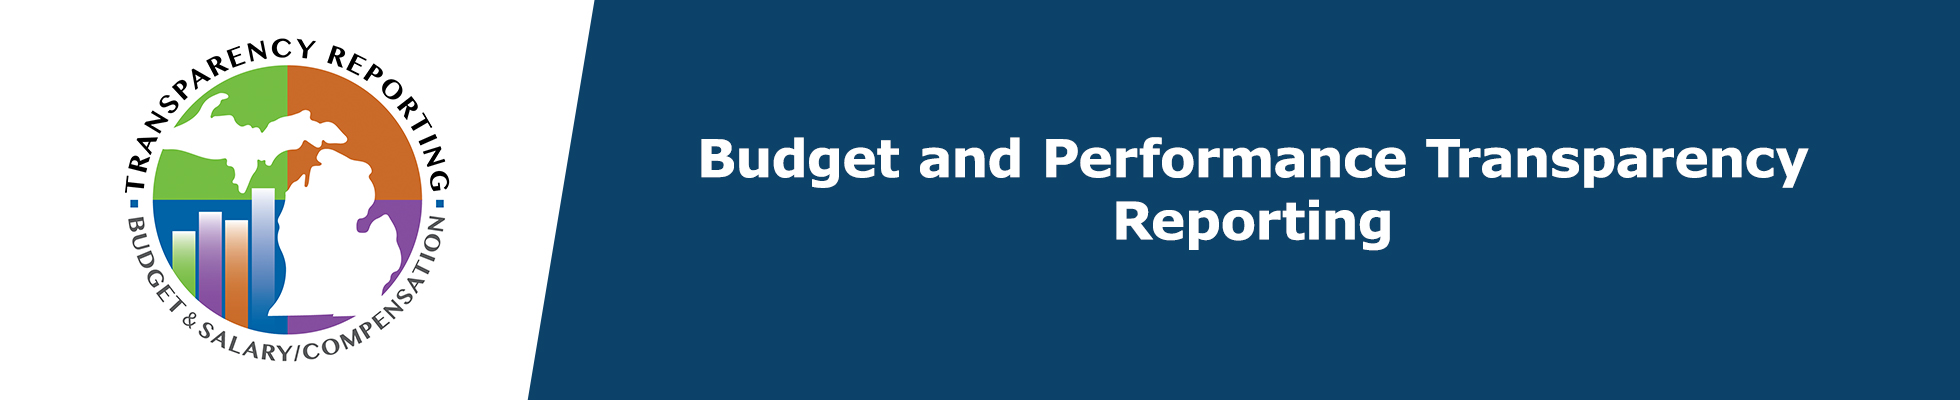 Budget and Performance Transparency Reporting Banner Logo